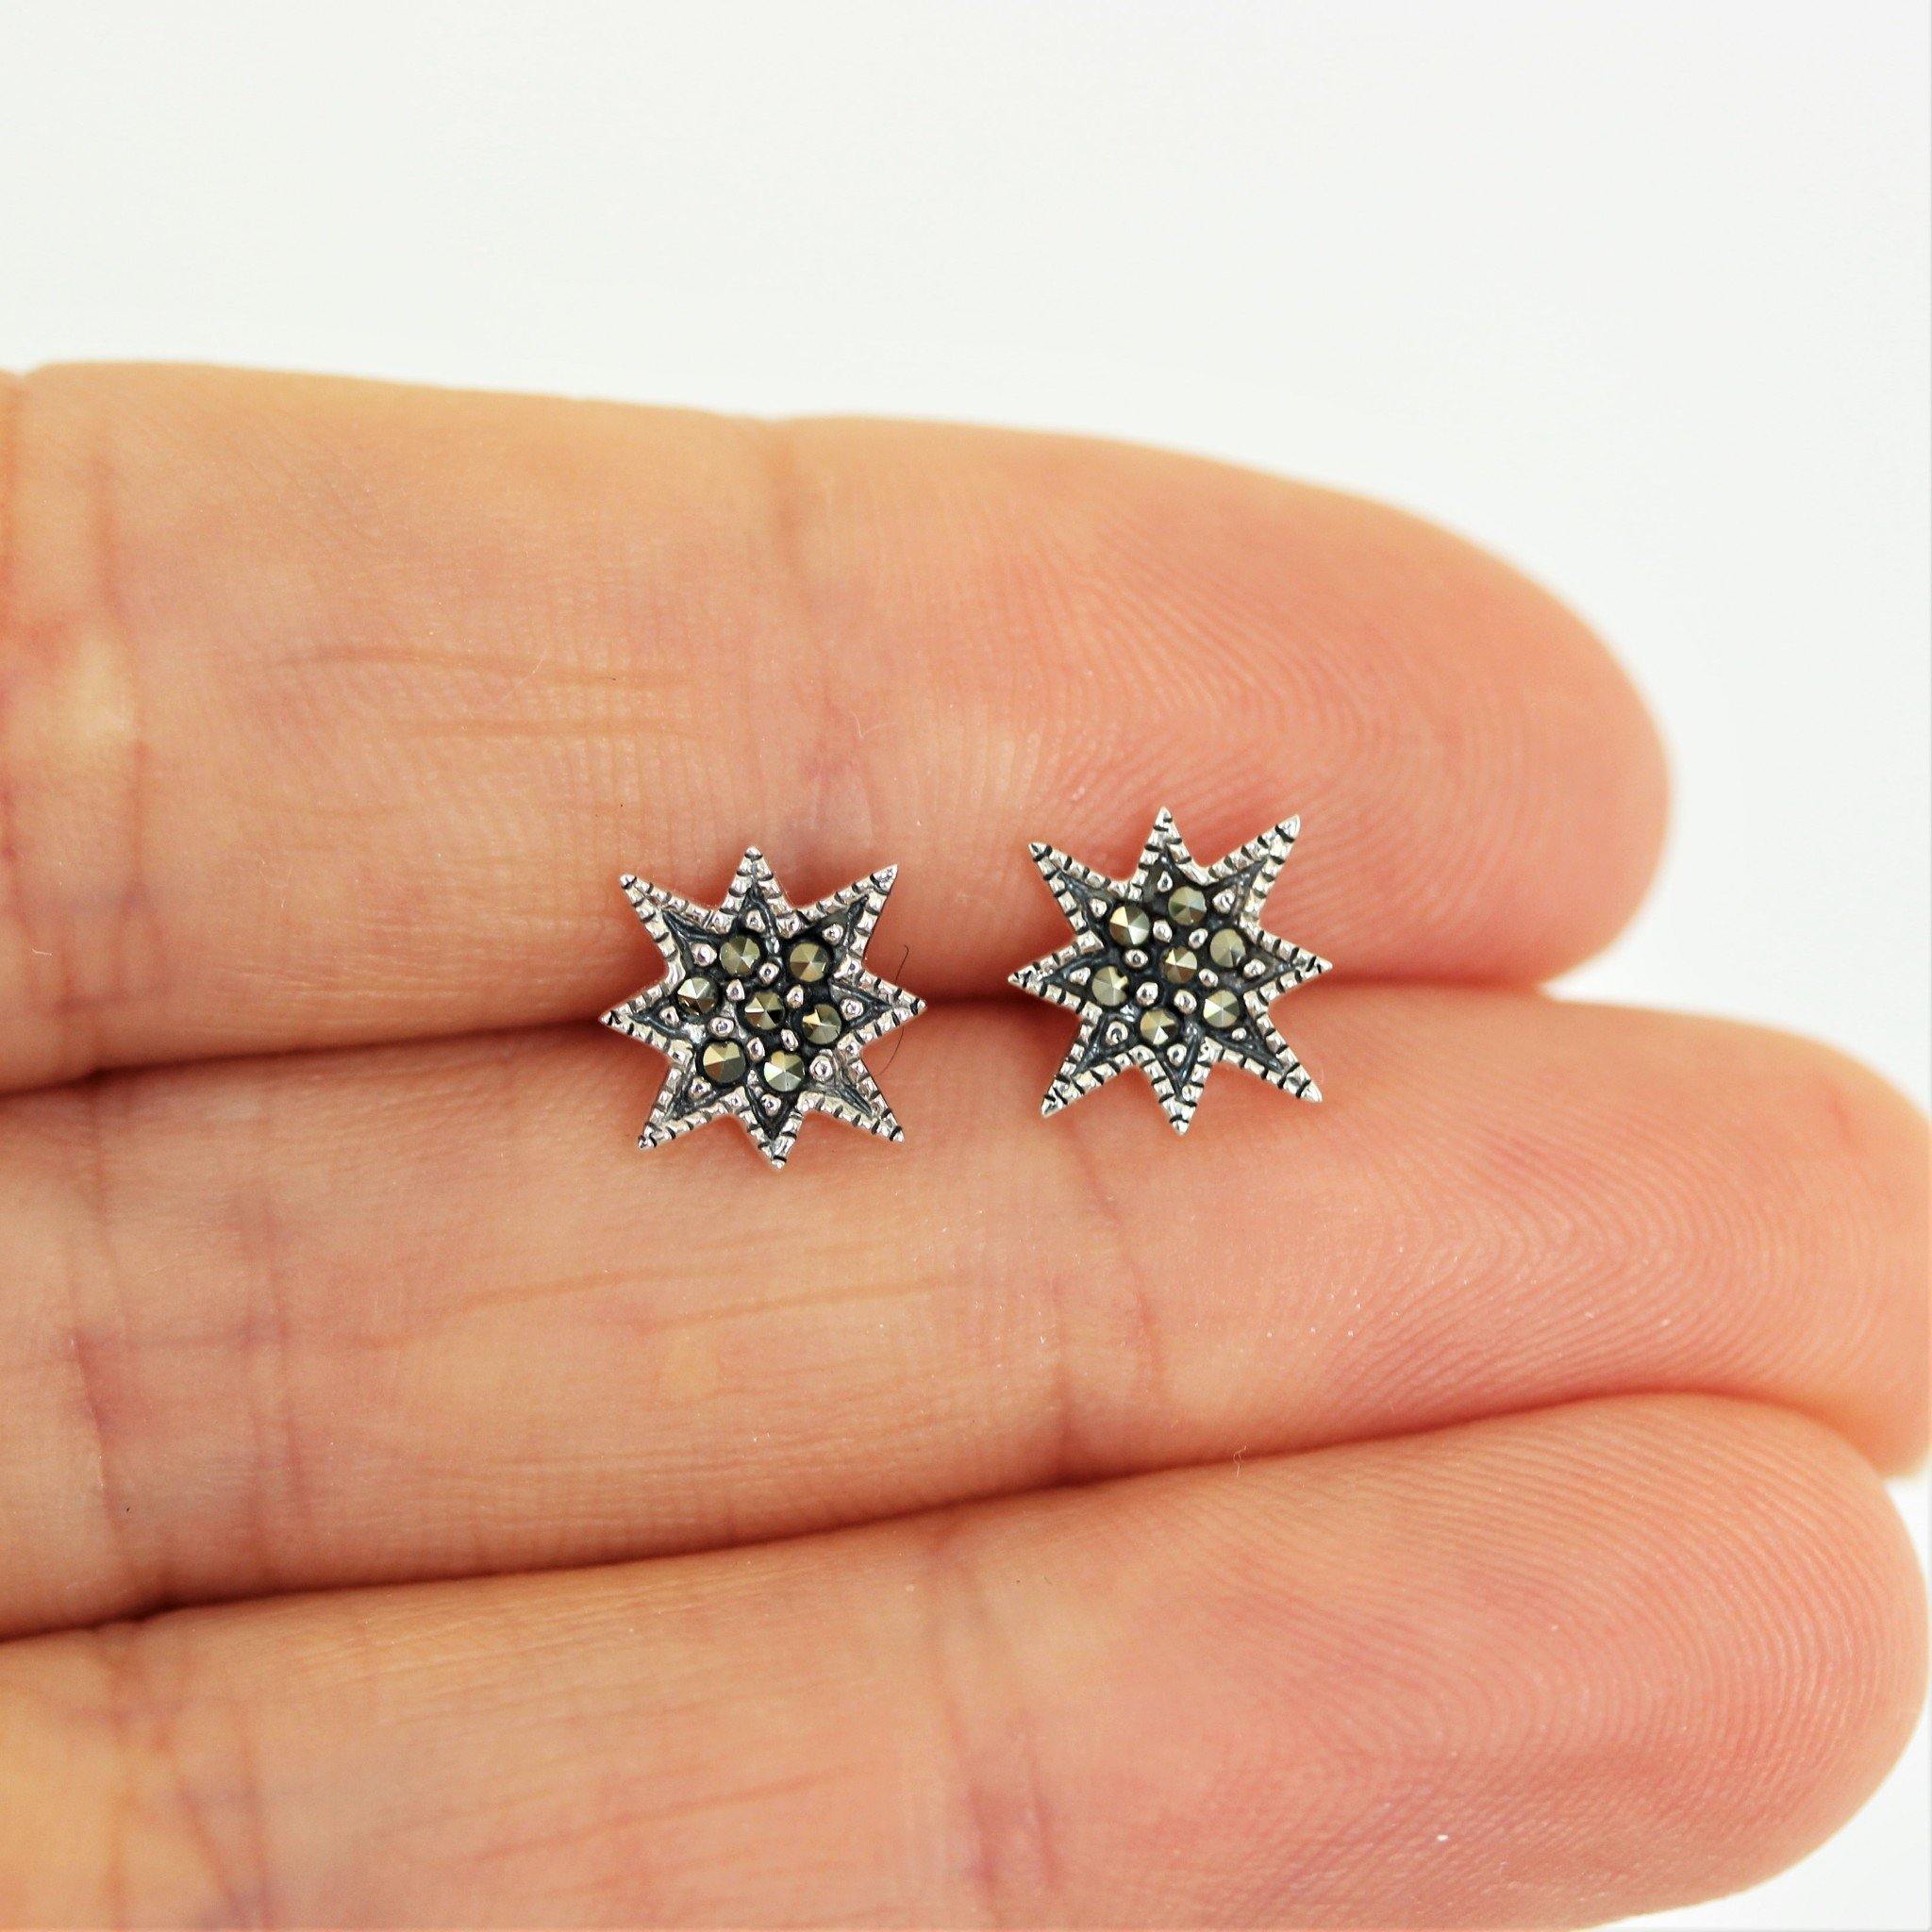 Sterling Silver Vintage Inspired Marcasite 10mm Pointy Star Stud Earrings - STERLING SILVER DESIGNS